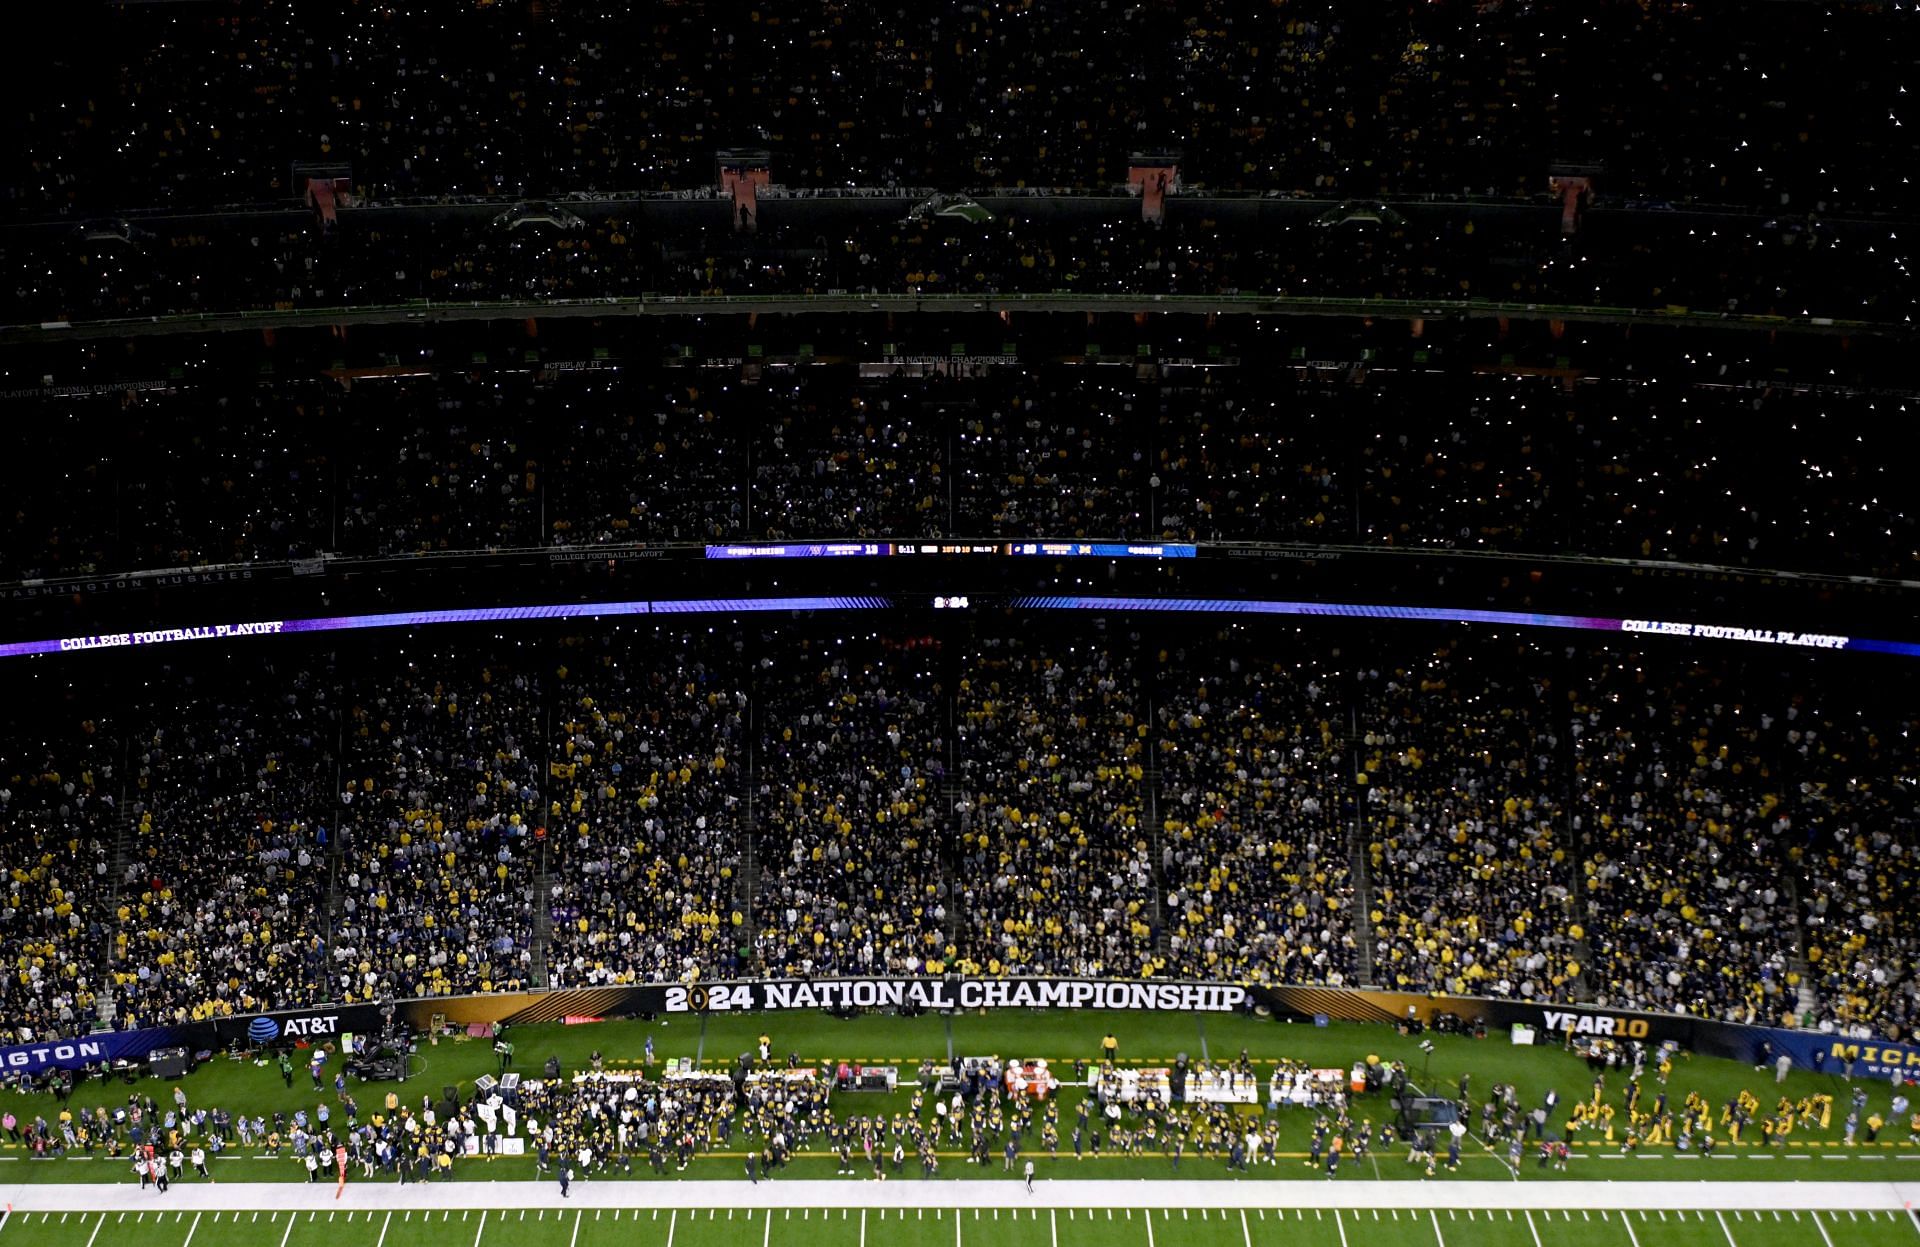 General view of the Michigan Wolverines